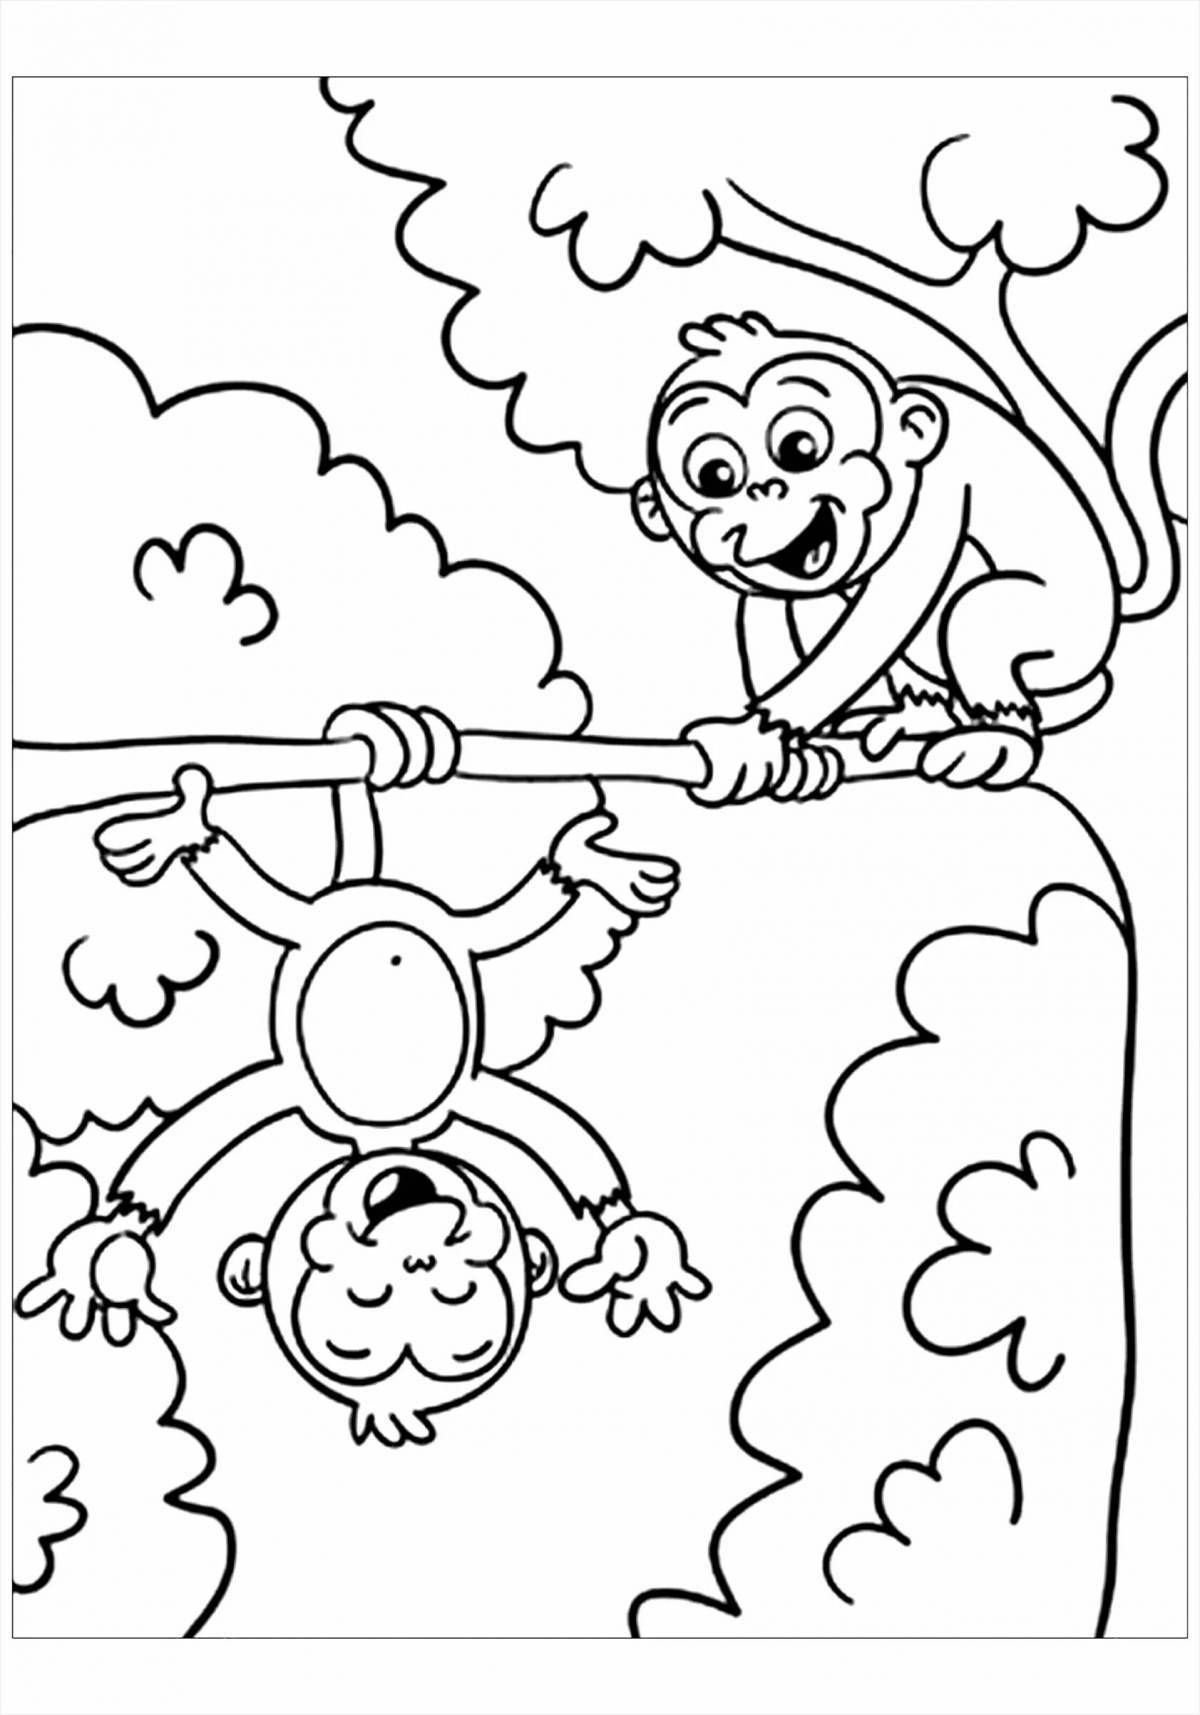 Color frenzy decoy kid coloring page